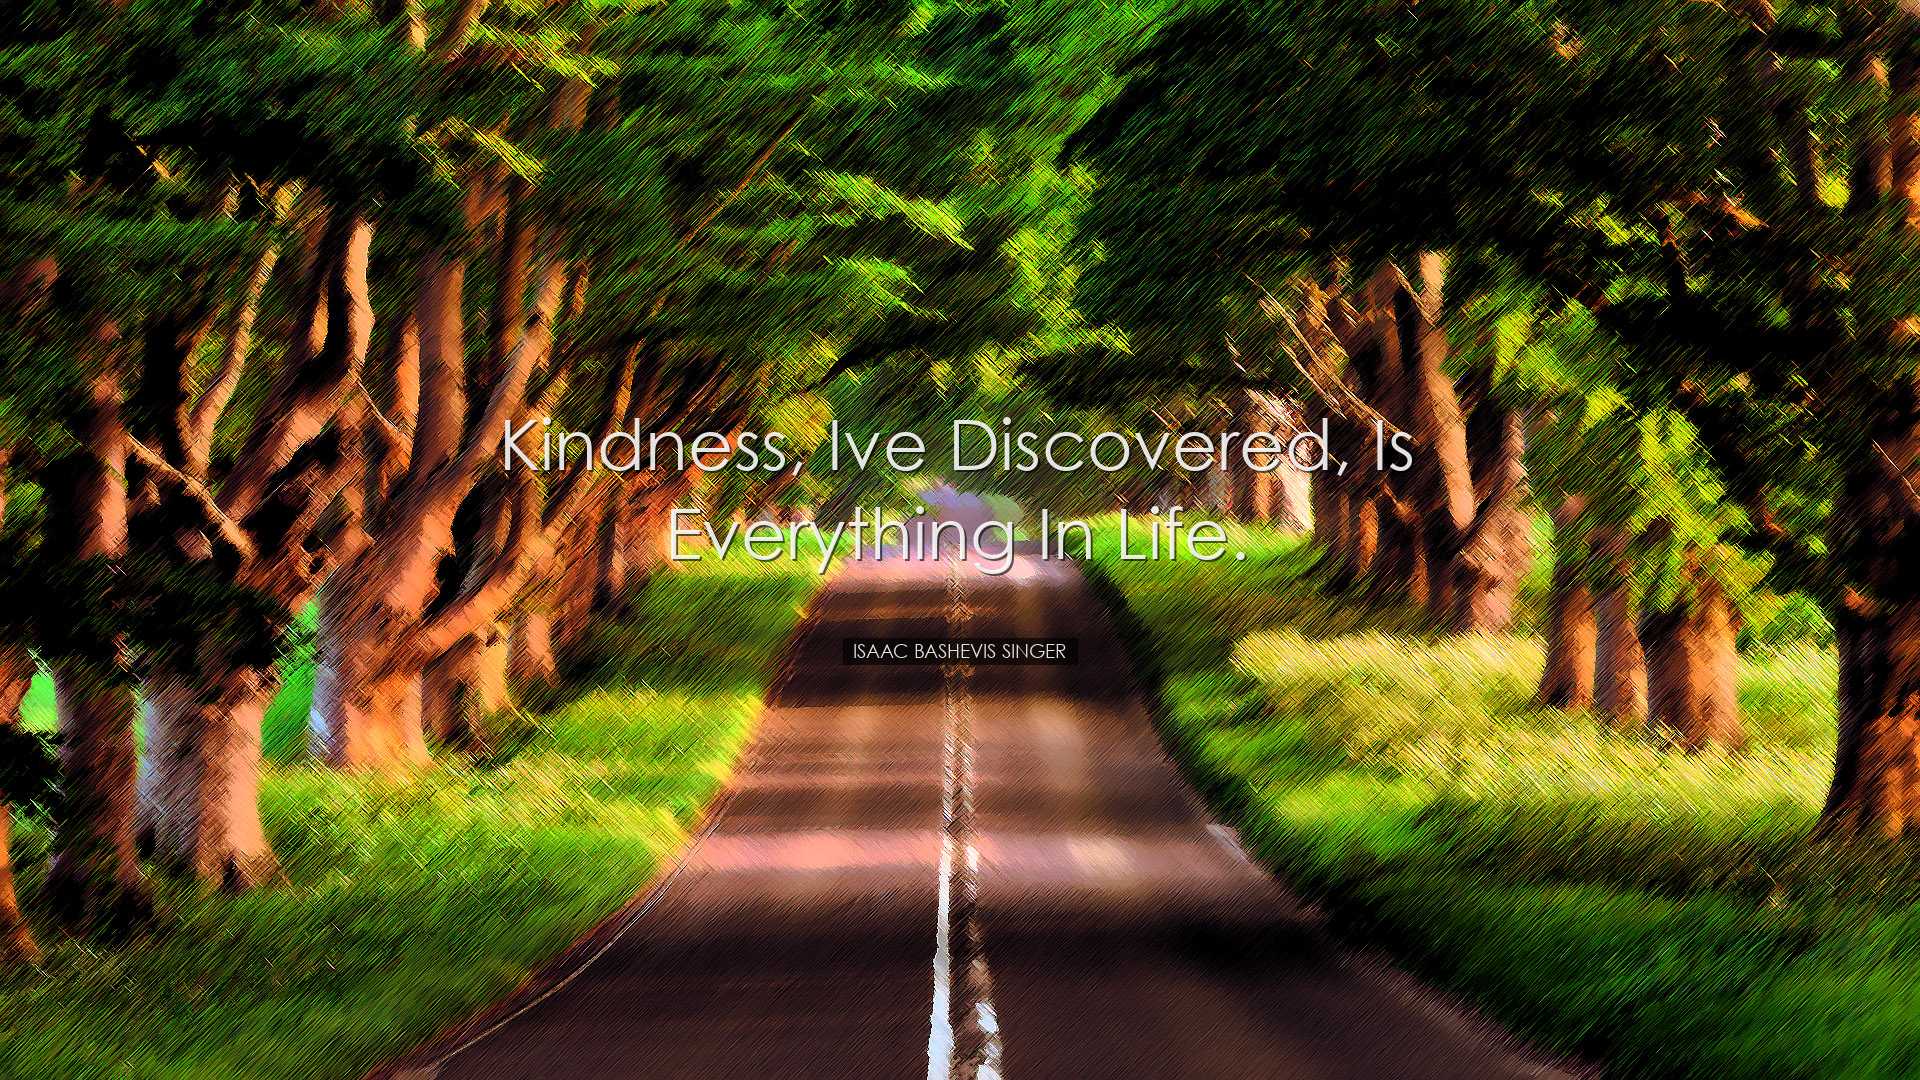 Kindness, Ive discovered, is everything in life. - Isaac Bashevis